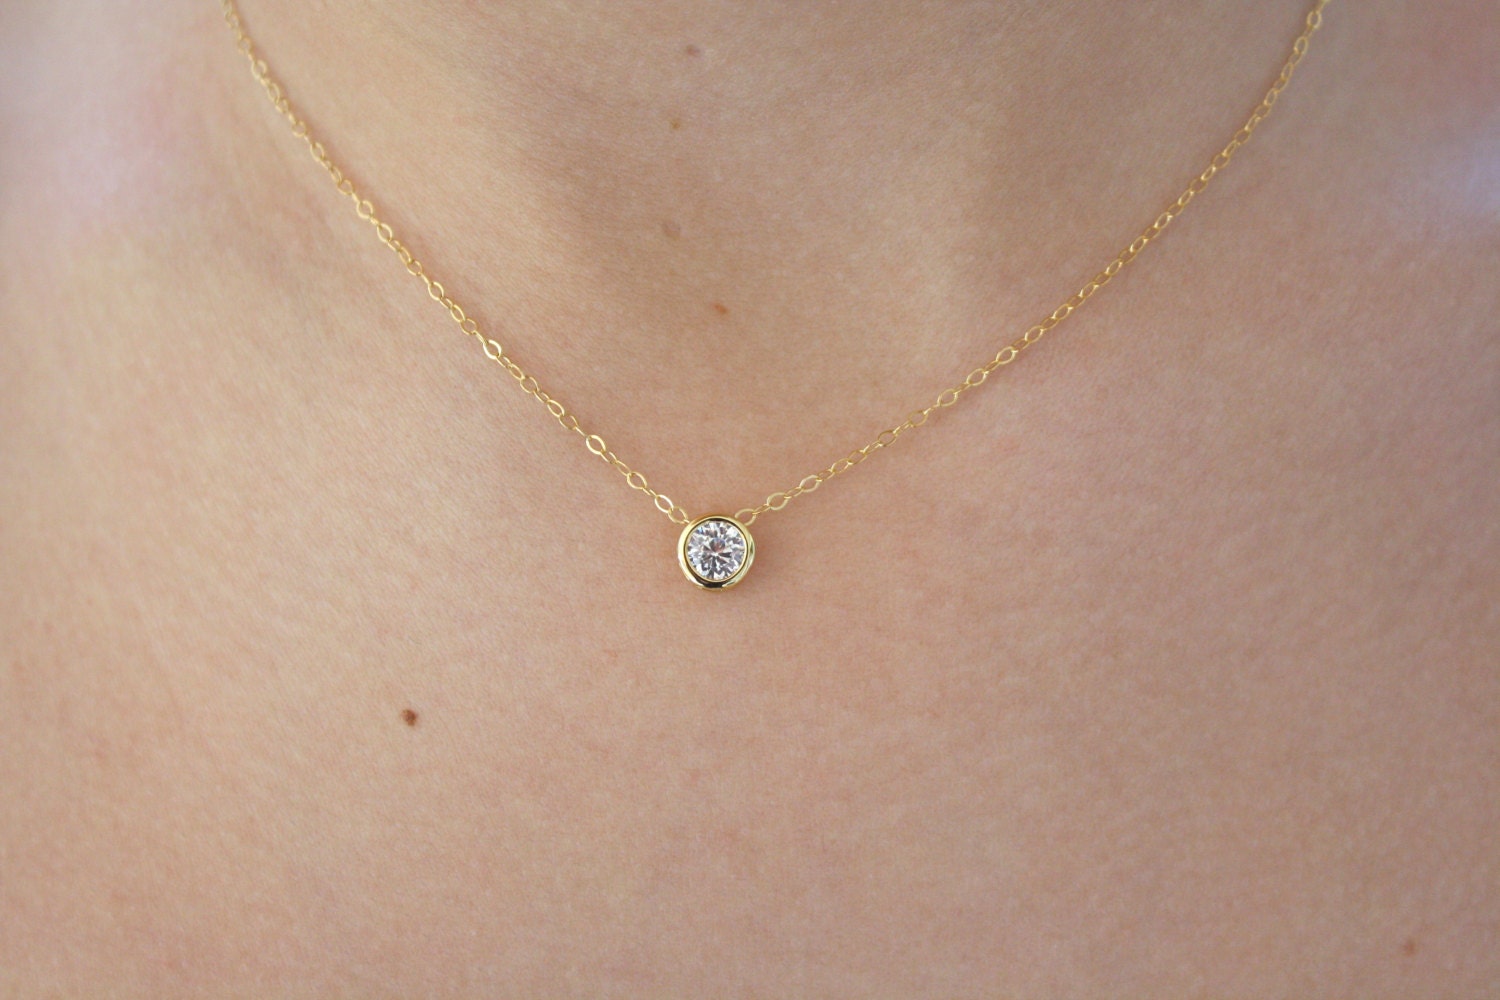 Gold Necklace Dainty Gold Necklace Gold solitaire Necklace Crystal Necklace Bridesmaid Necklace Gold Choker Best Friend Gifts girlfriend